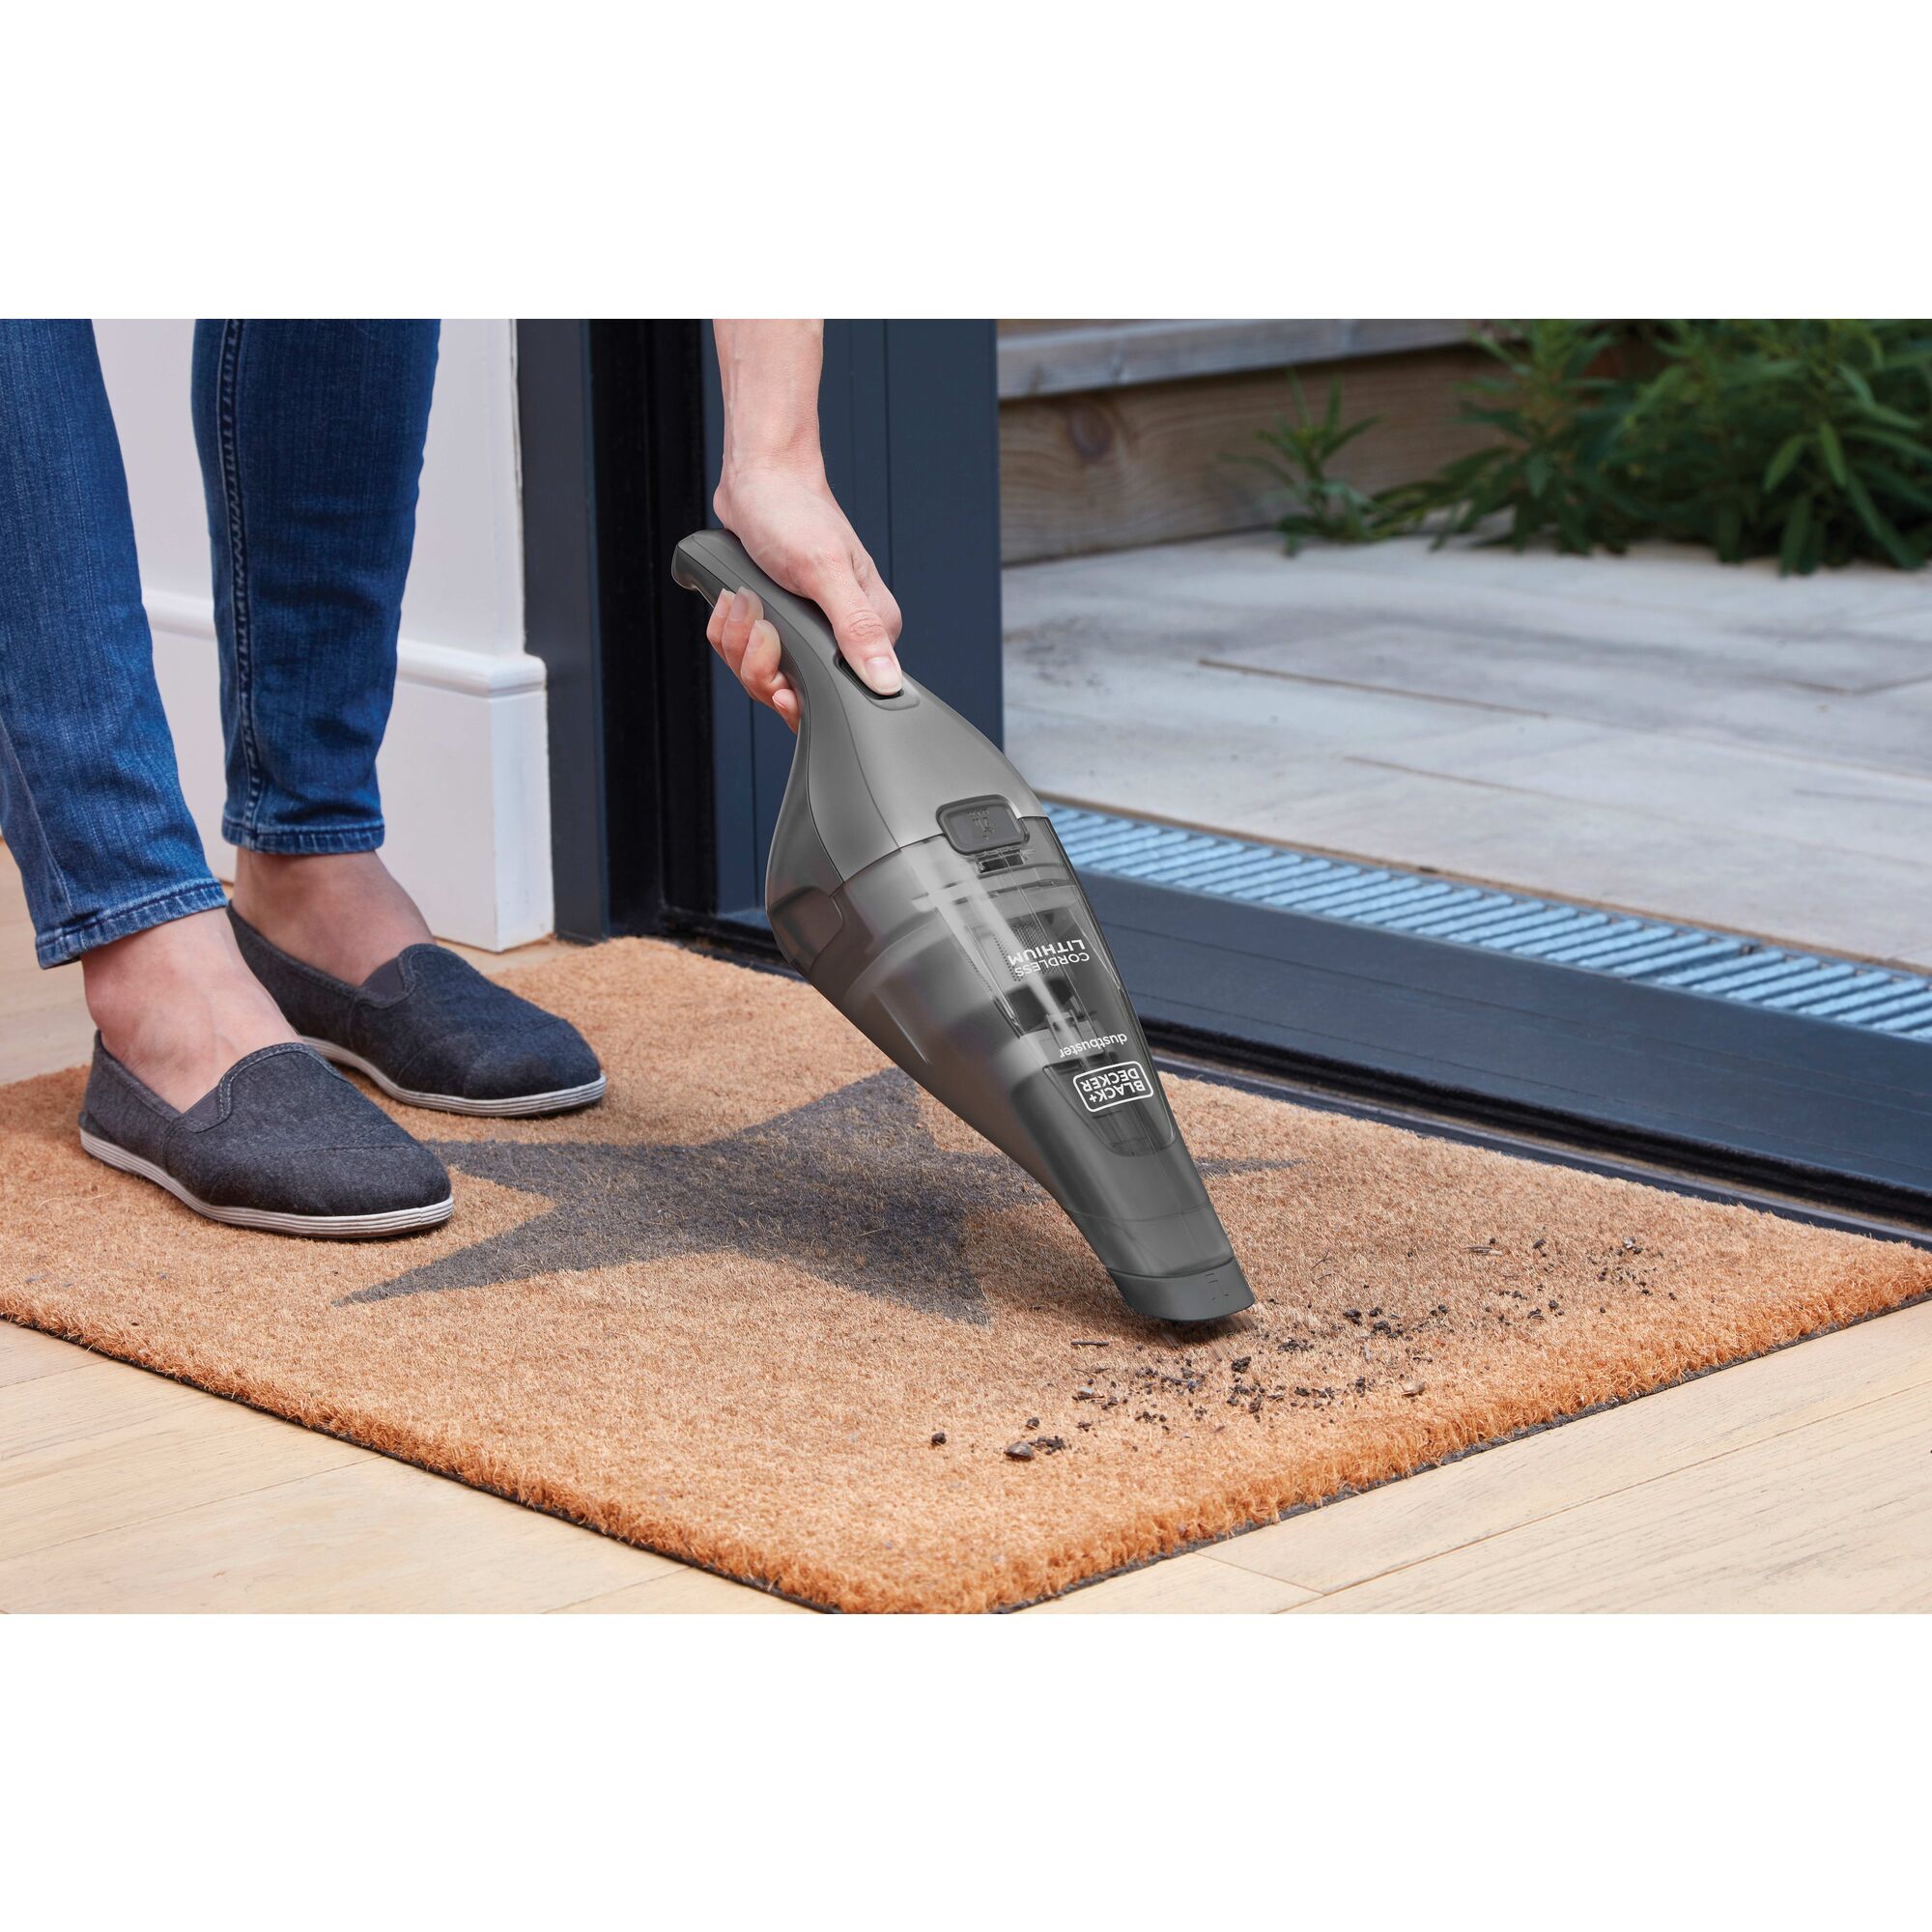 Woman using dustbuster on a welcome mat